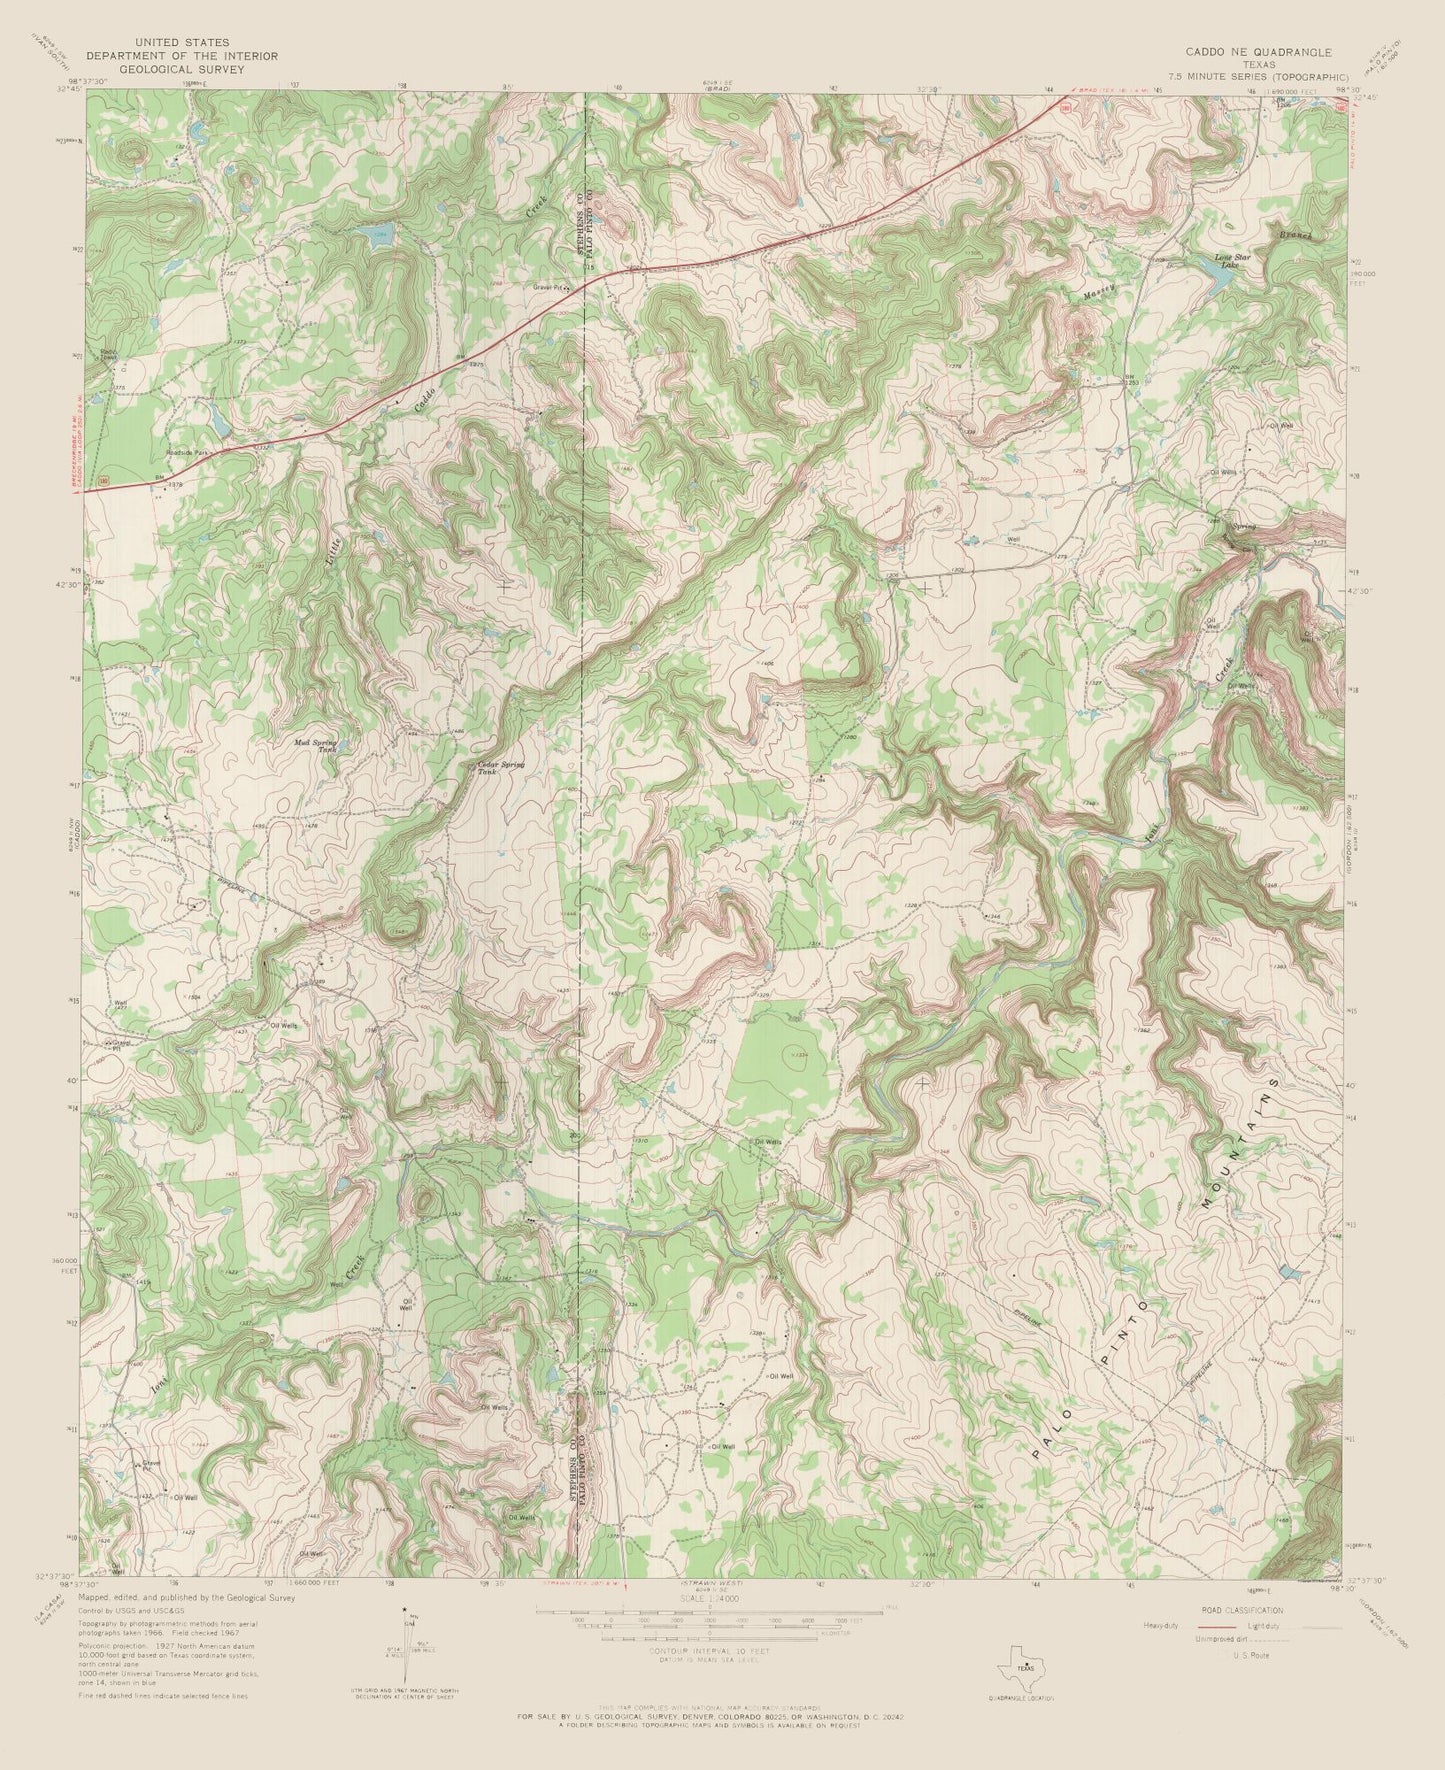 Topographical Map - Caddo Texas North East Quad - USGS 1967 - 23 x 28.17 - Vintage Wall Art